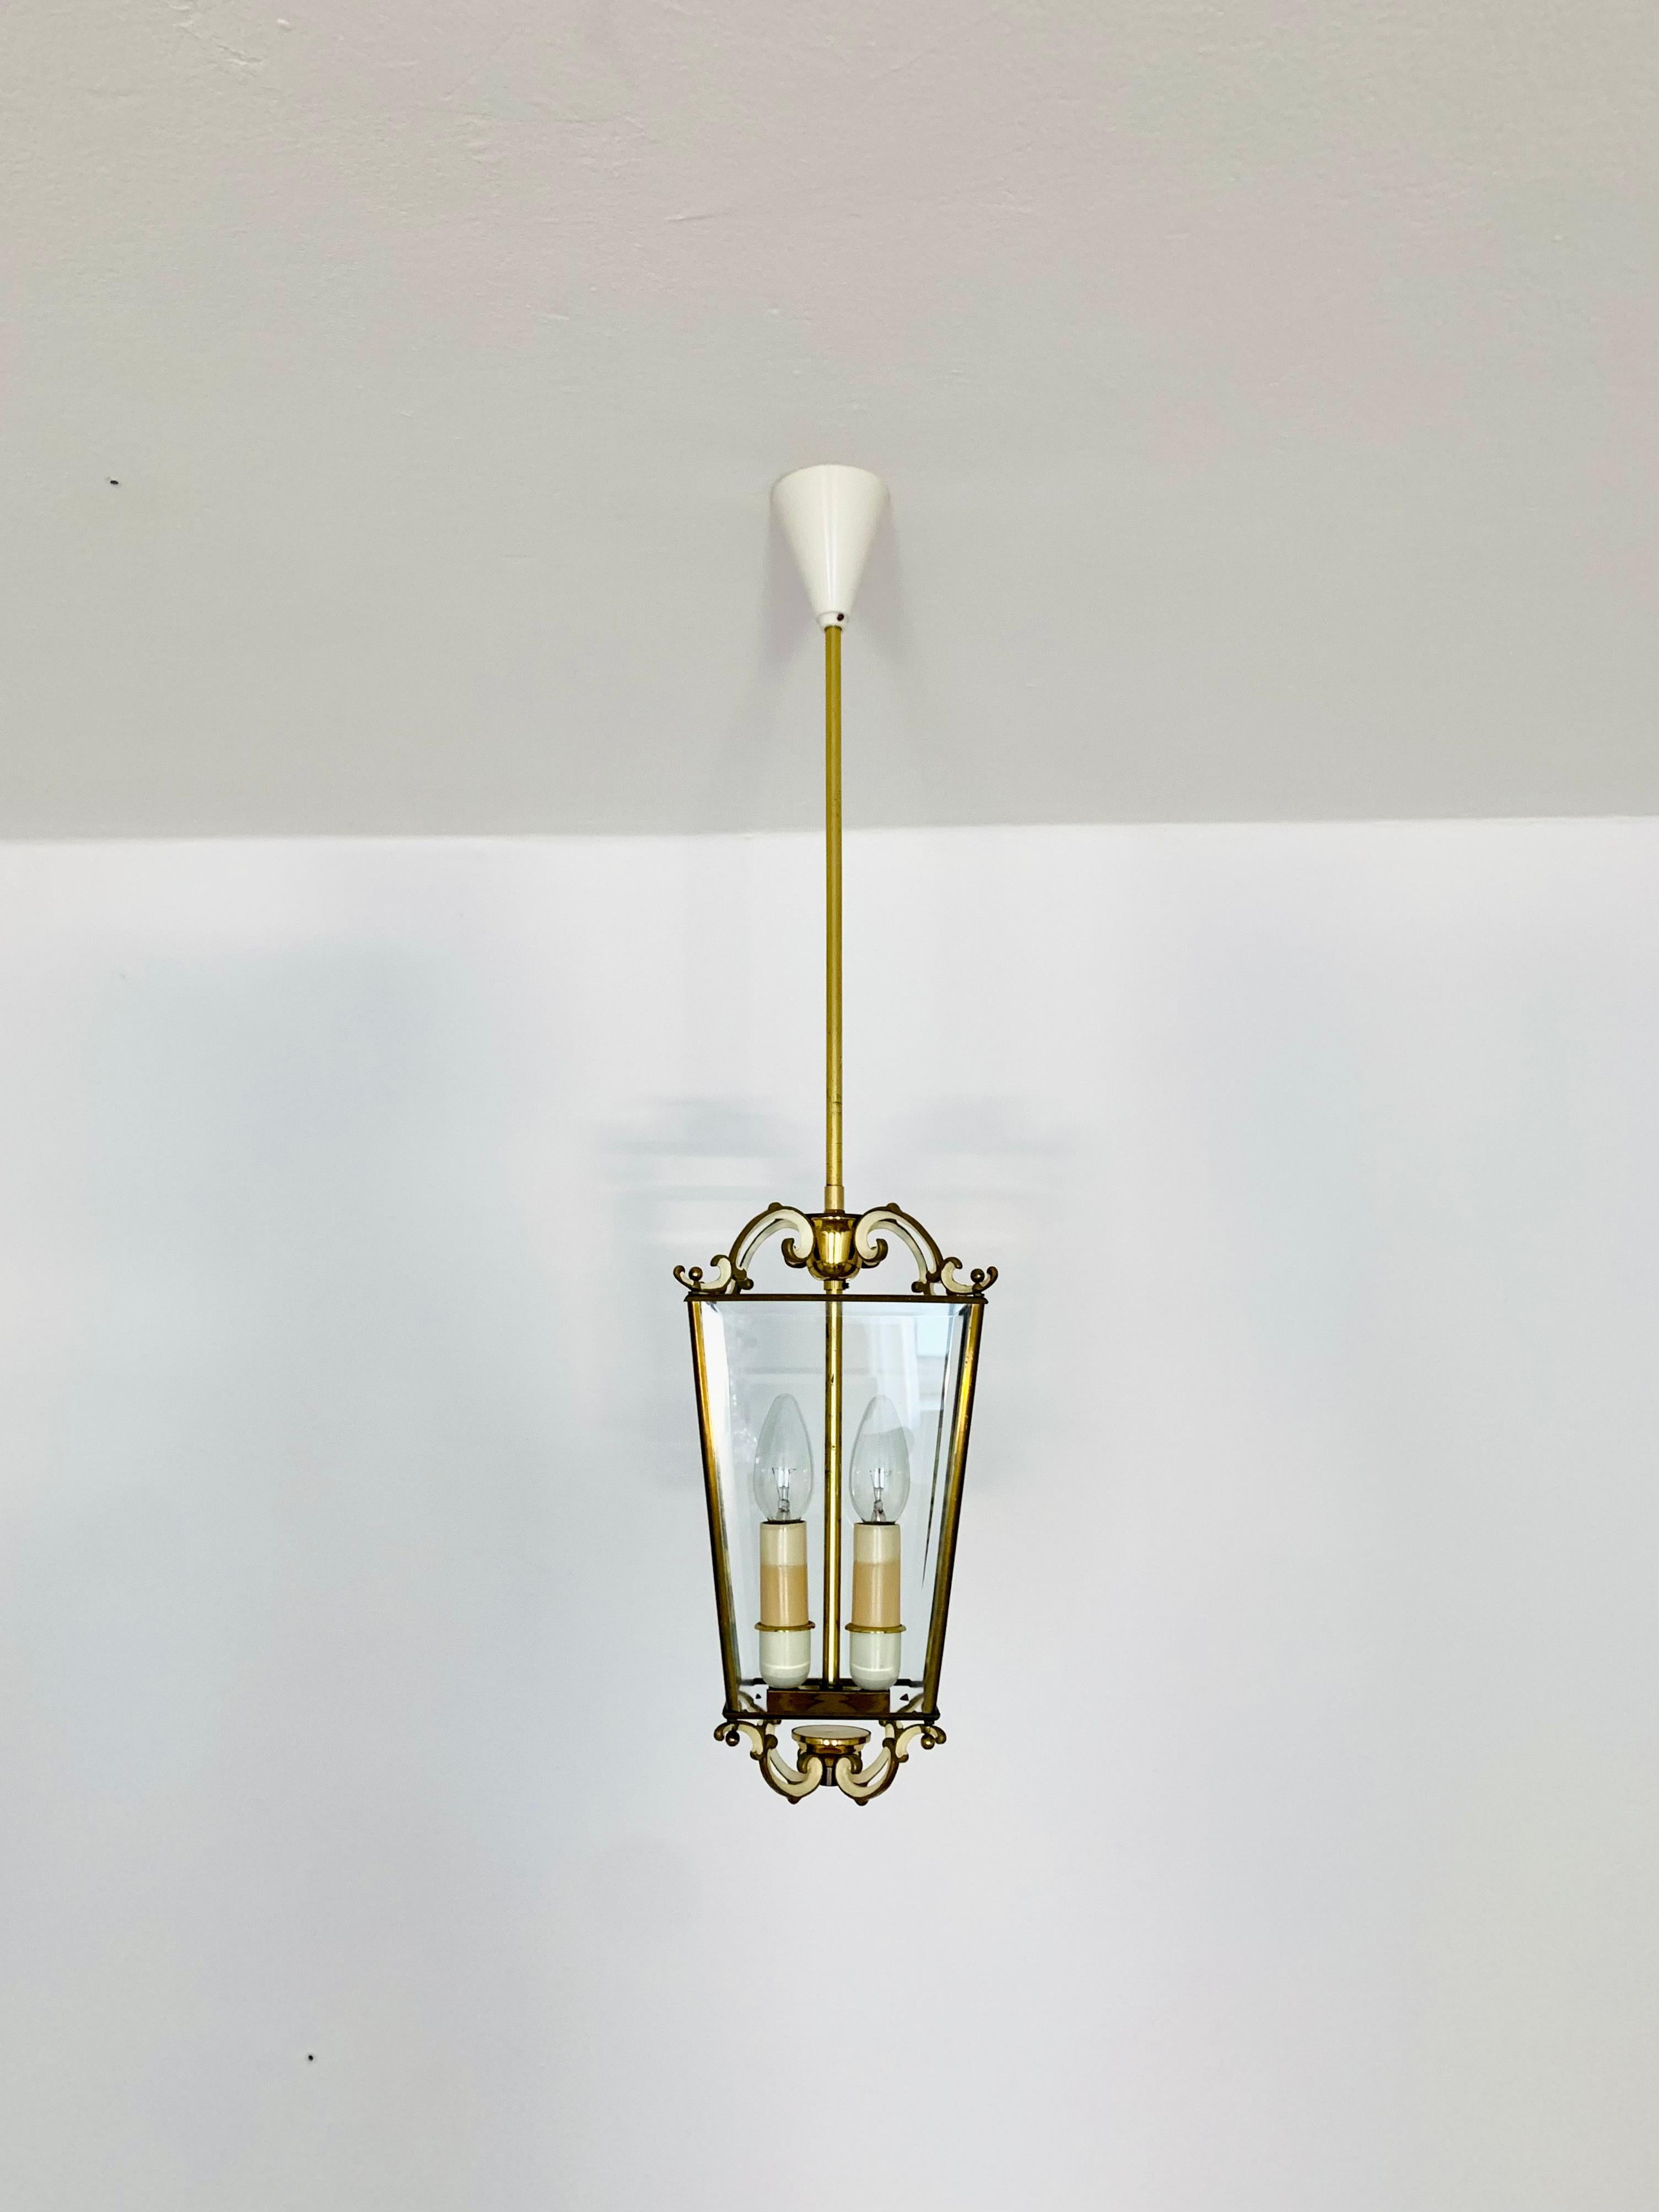 Very high quality lamp from the 1950s.
Exceptional design with great attention to detail.
A very comfortable light is created.

Condition:

Very good vintage condition with slight signs of age-related wear.
Minimal signs of wear on the surface.

The